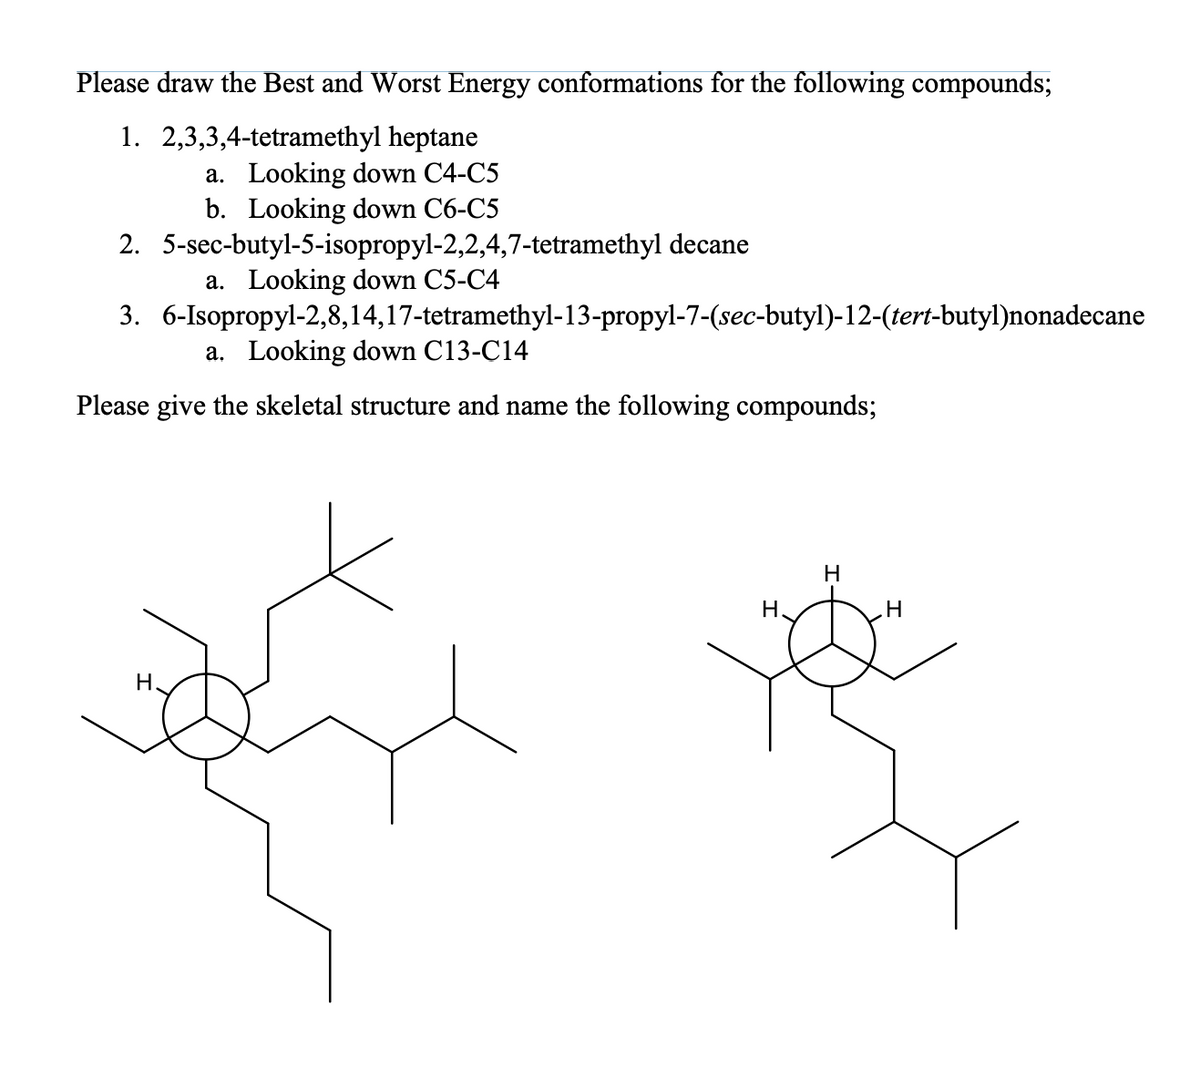 Please draw the Best and Worst Energy conformations for the following compounds;
1. 2,3,3,4-tetramethyl heptane
a. Looking down C4-C5
b. Looking down C6-C5
2.
3. 6-Isopropyl-2,8,14,17-tetramethyl-13-propyl-7-(sec-butyl)-12-(tert-butyl)nonadecane
5-sec-butyl-5-isopropyl-2,2,4,7-tetramethyl decane
a. Looking down C5-C4
a. Looking down C13-C14
Please give the skeletal structure and name the following compounds;
H.
H.
H
H